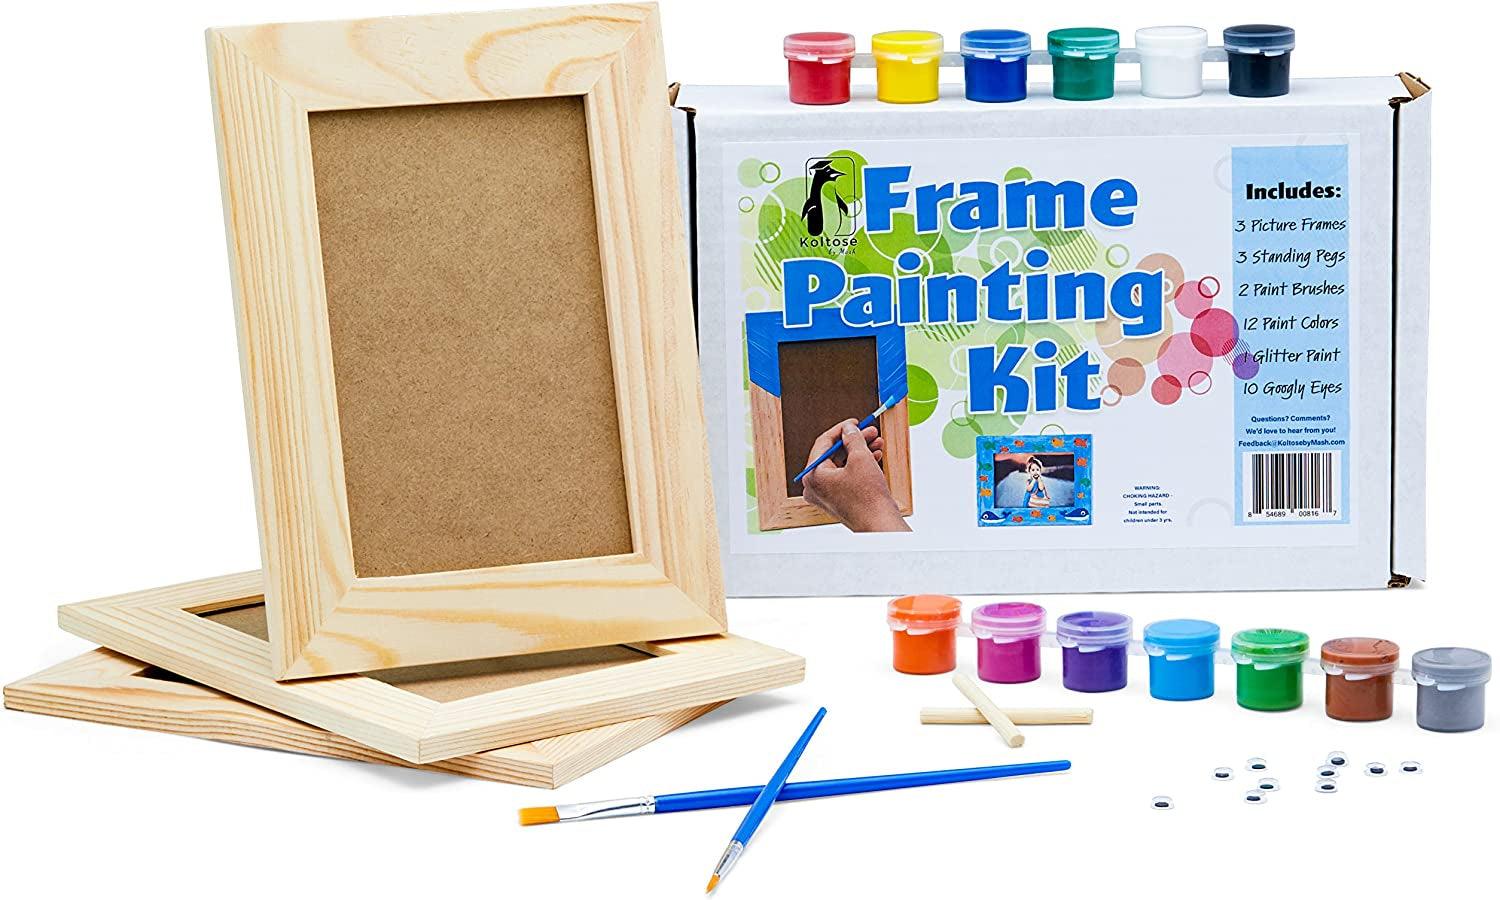 Koltose by Mash Picture Frame Painting Craft Kit, DIY Arts and Crafts Kit, 3 Unfinished Solid Wood Picture Frames (6x4 Photos) with Wooden